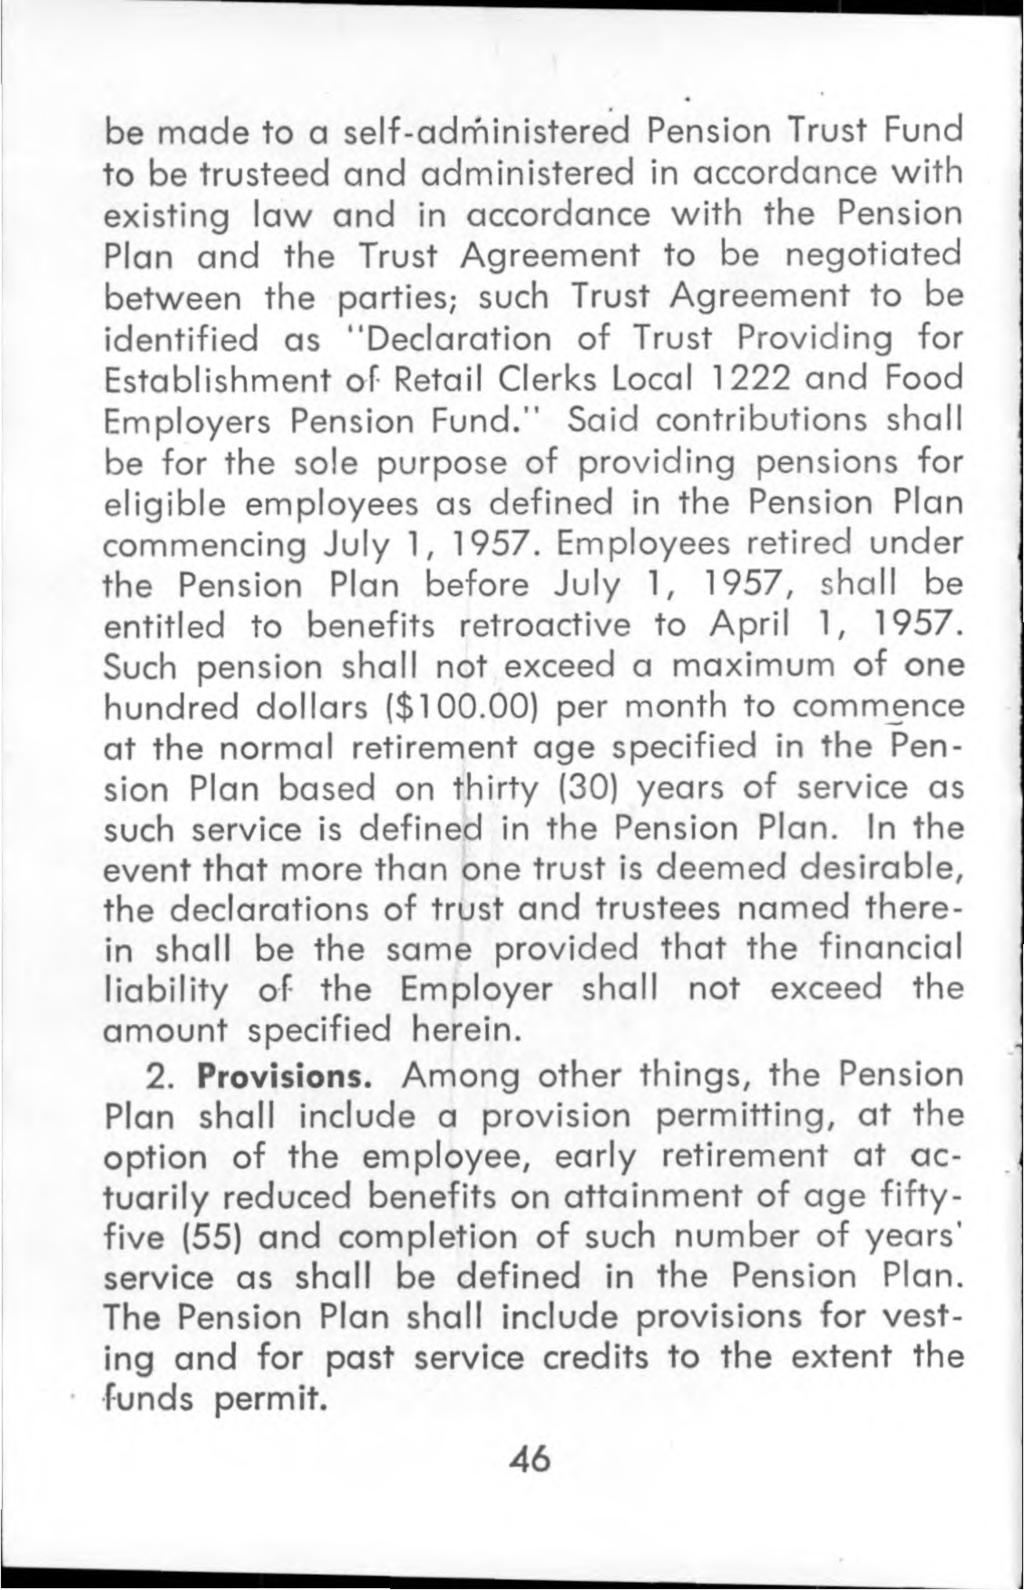 be made to a self-adm inistered Pension Trust Fund to be trusteed and adm inistered in accordance w ith existing law and in accordance w ith the Pension Plan and the Trust Agreement to be negotiated